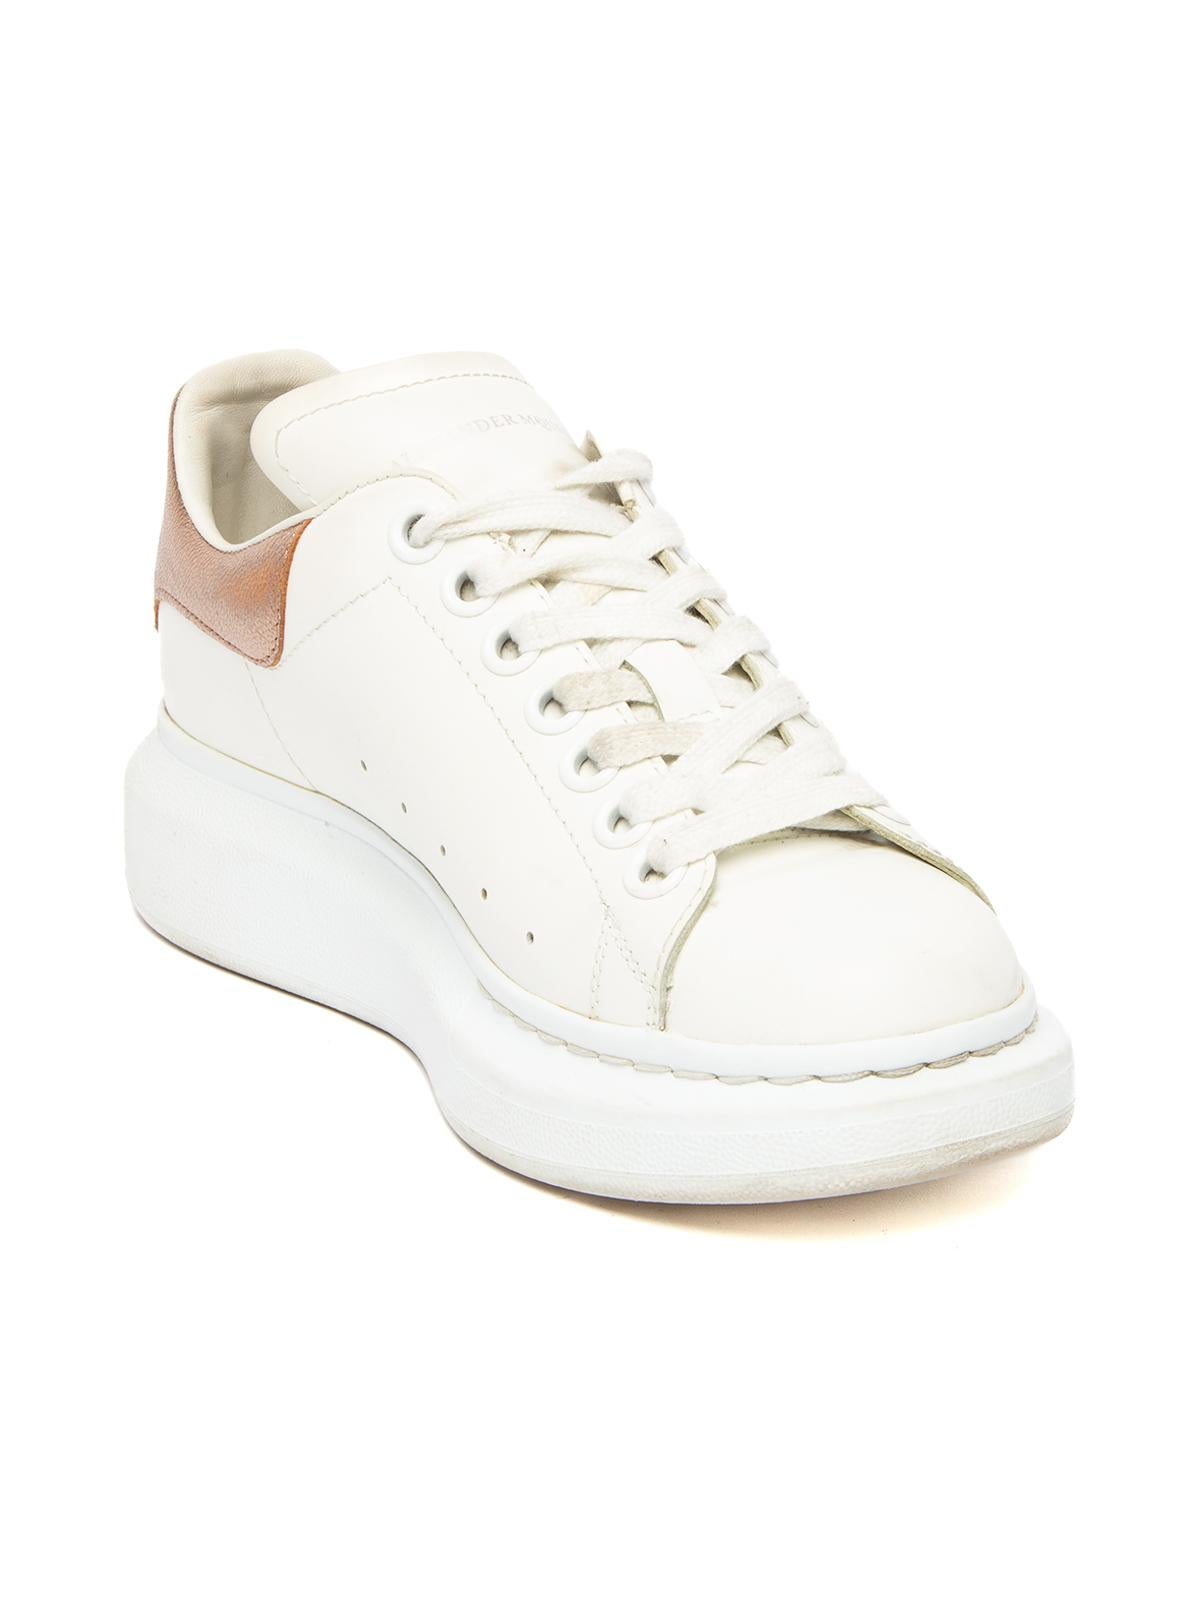 CONDITION is Good. Some wear to shoes is evident. Some wear to insoles, collar on sneakers, scuff marks to leather and slight wear to soles on this used Alexander McQueen designer resale item. Details White with rose gold collar Leather Low top